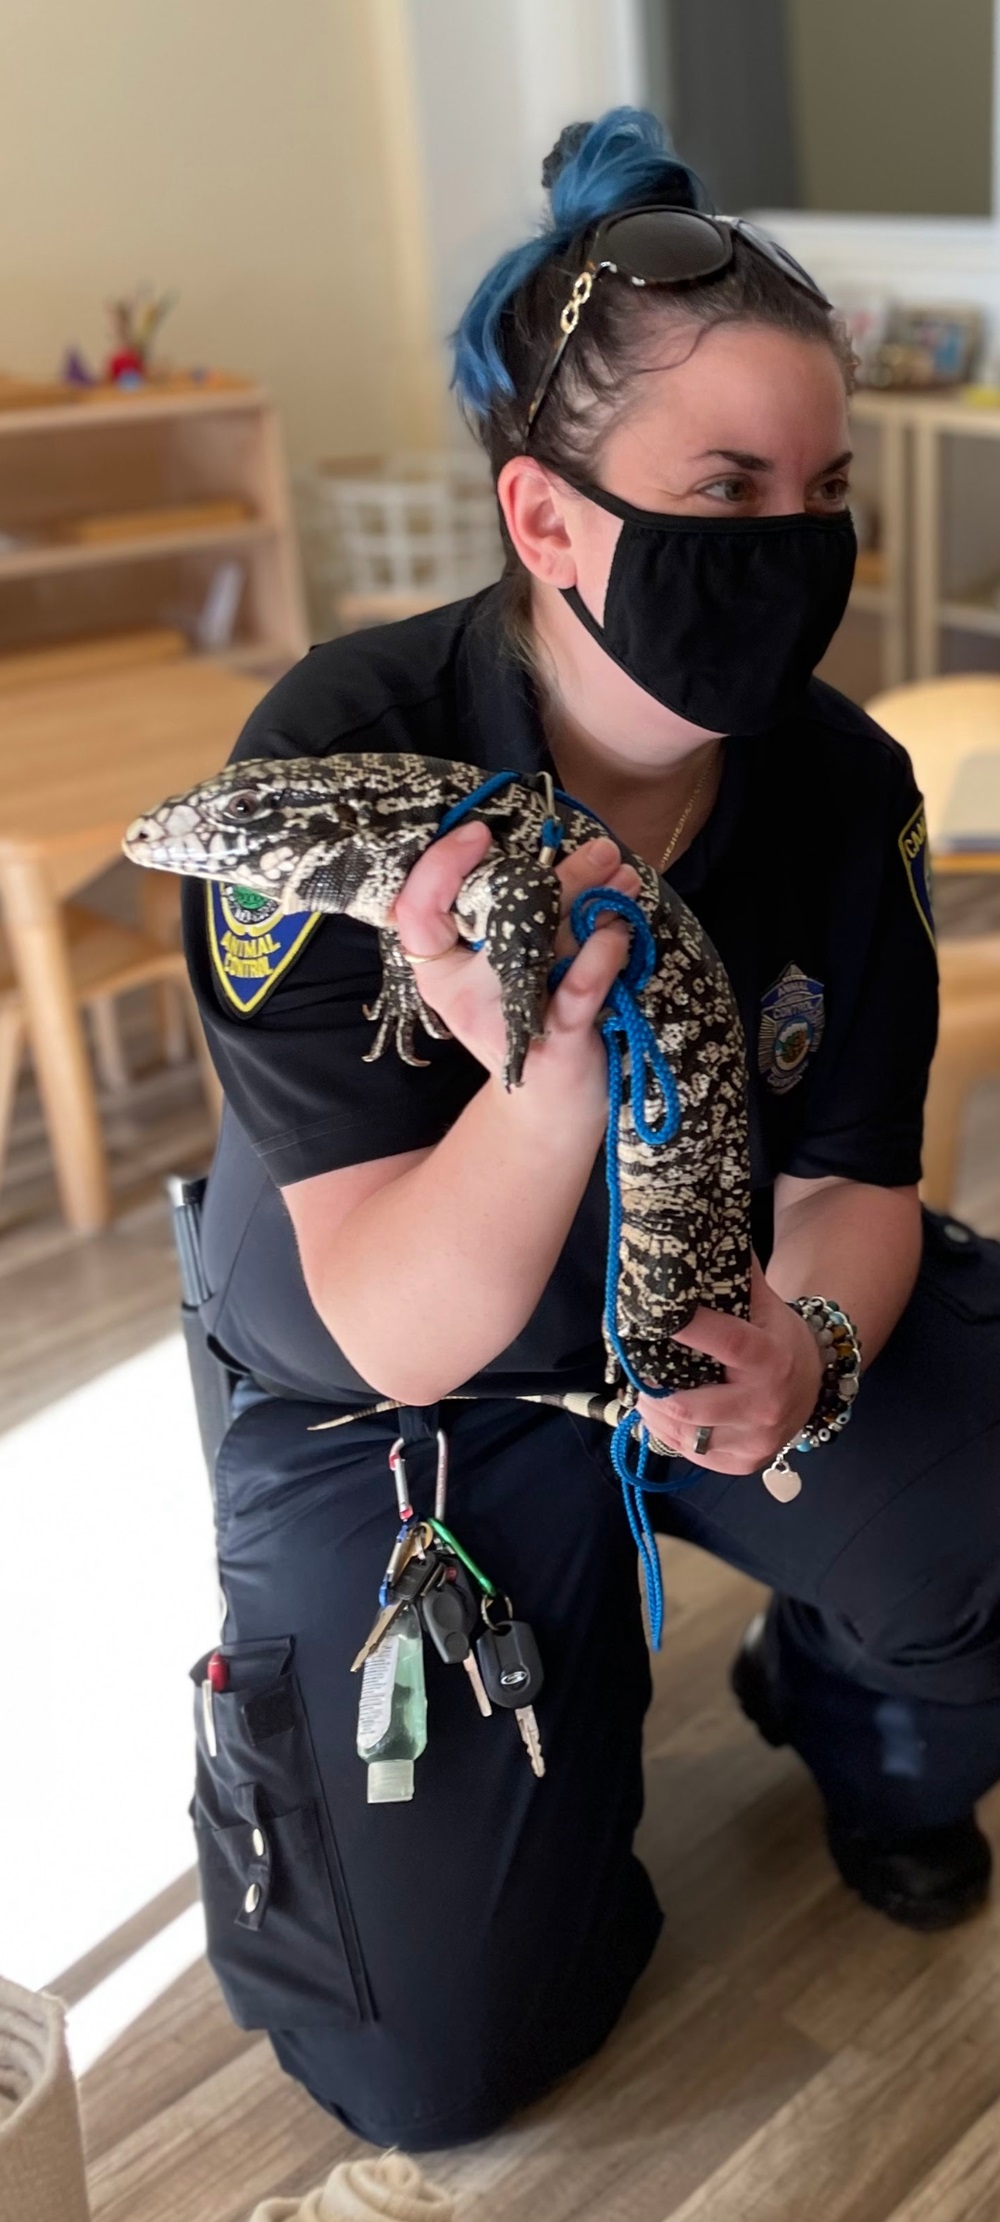 Animal Control Officer holding a reptile